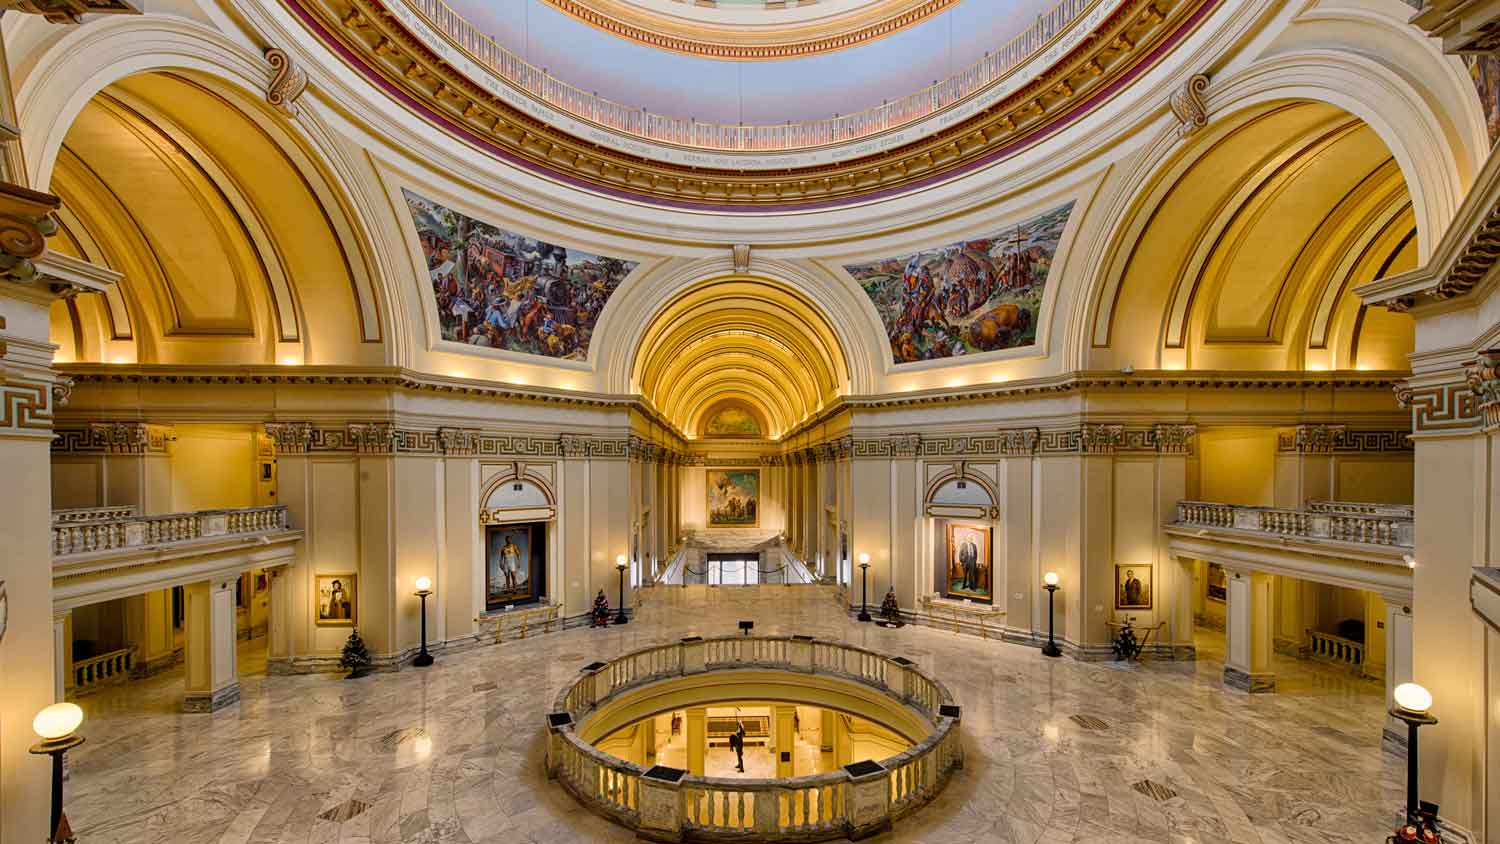 Inside the Oklahoma State Capitol Building